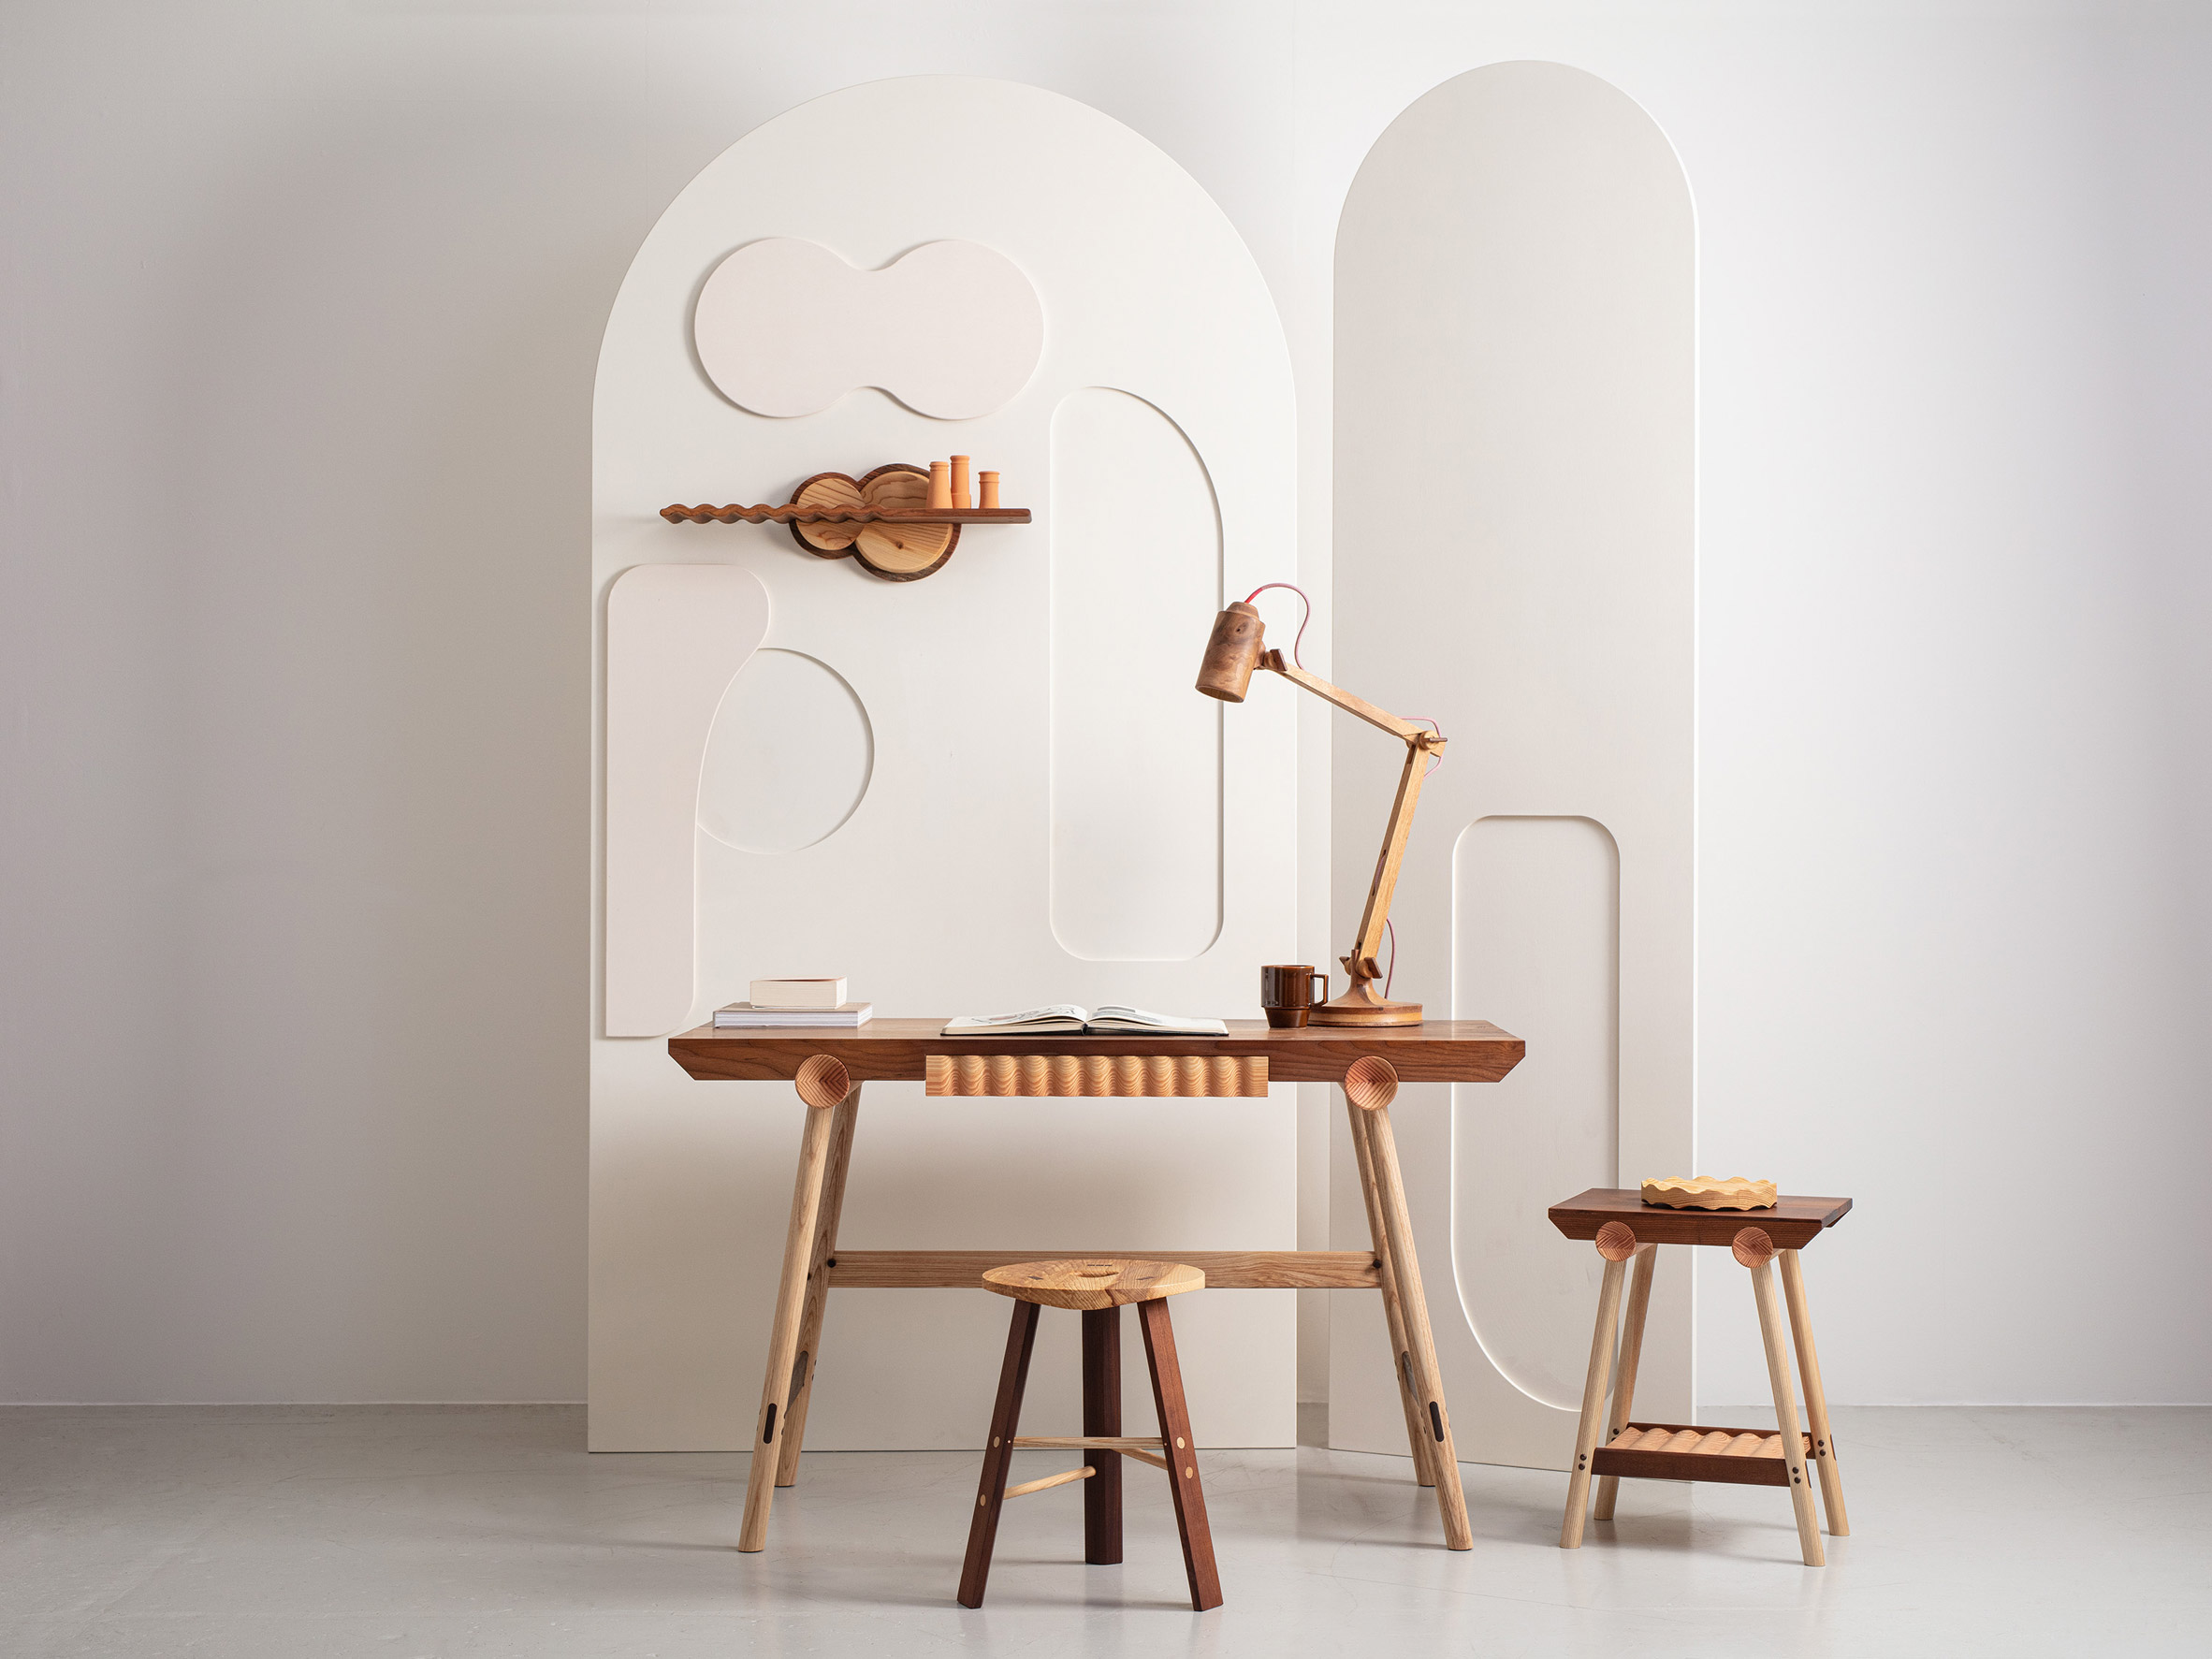 The desk, stool, sidetable and shelf from Jan Hendzel Studio's Bowater collection made using British hardwood